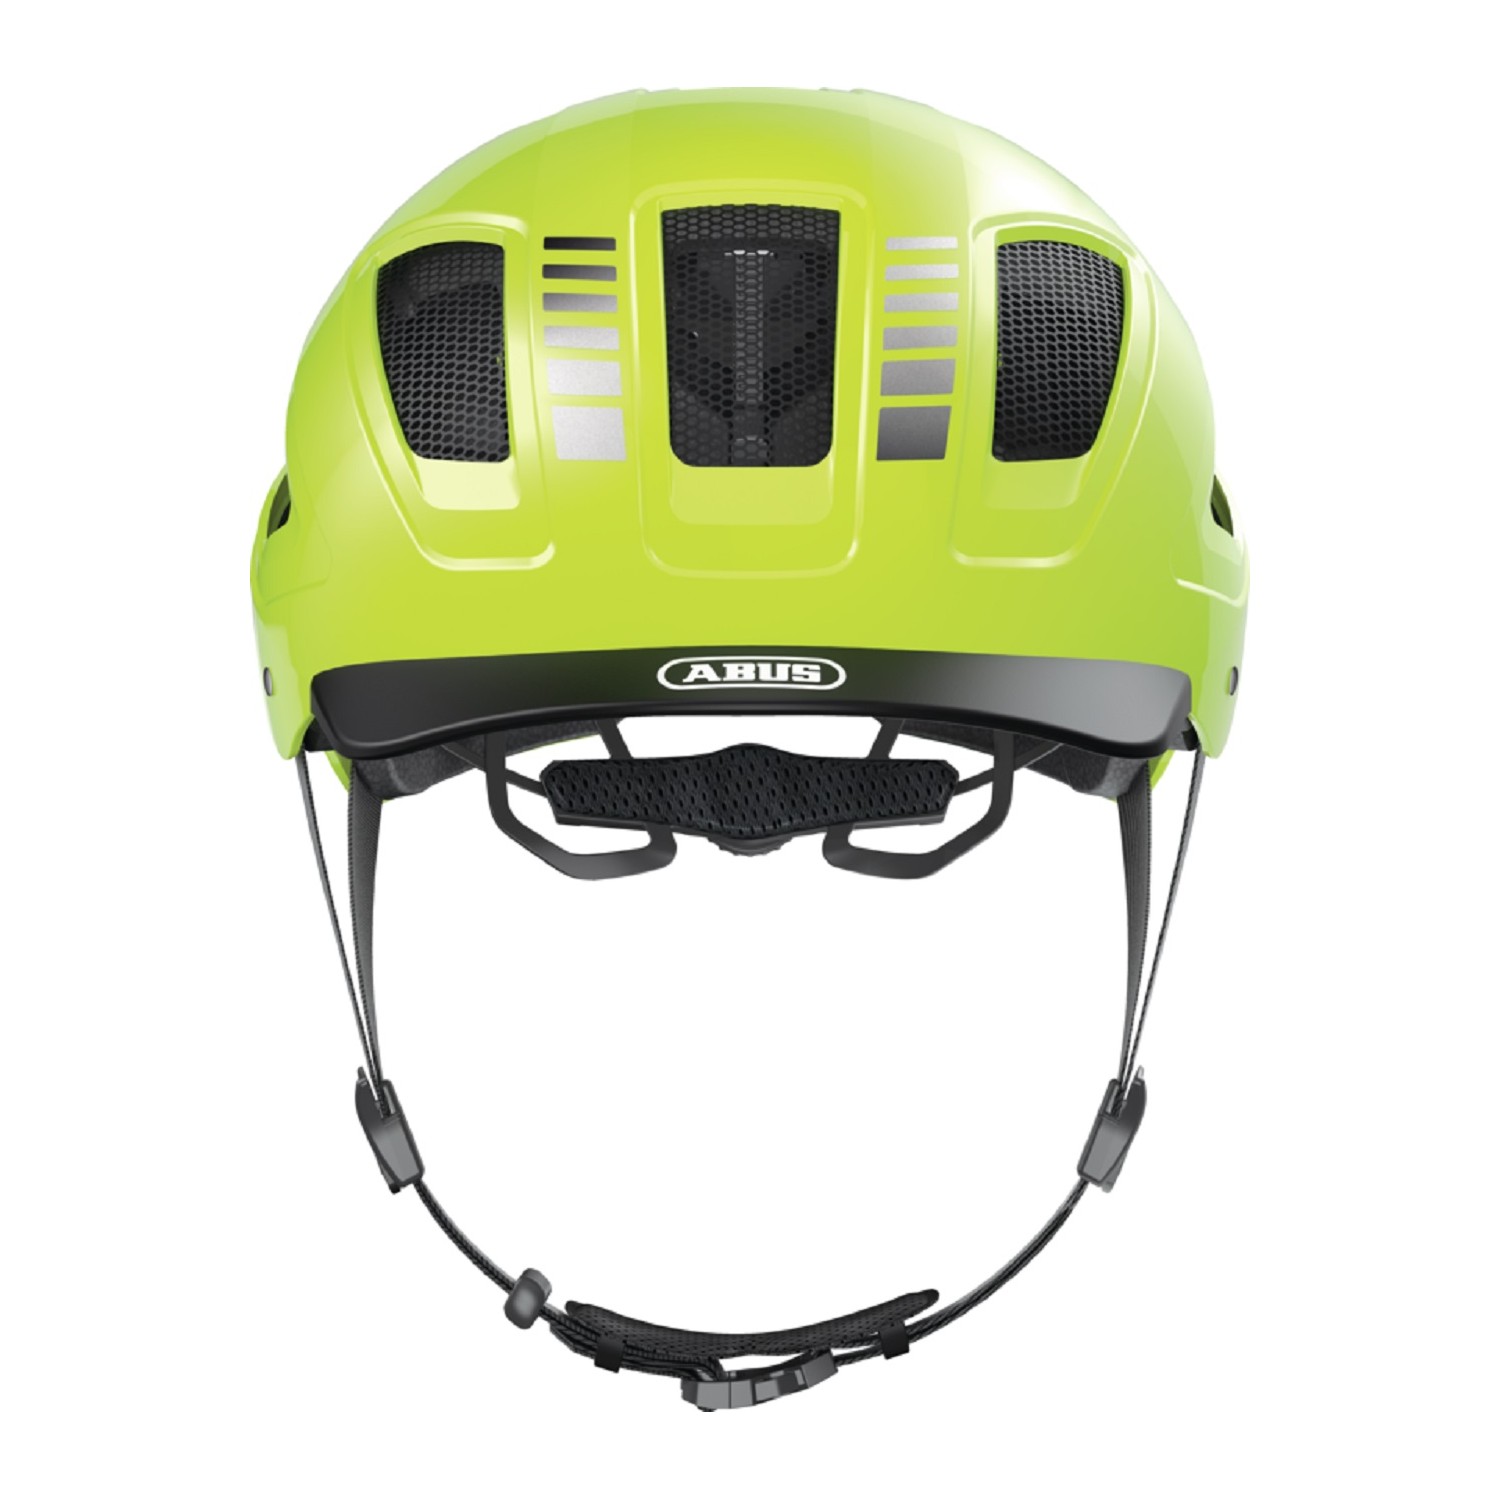 Kask rowerowy Abus Hyban 2.0 MIPS